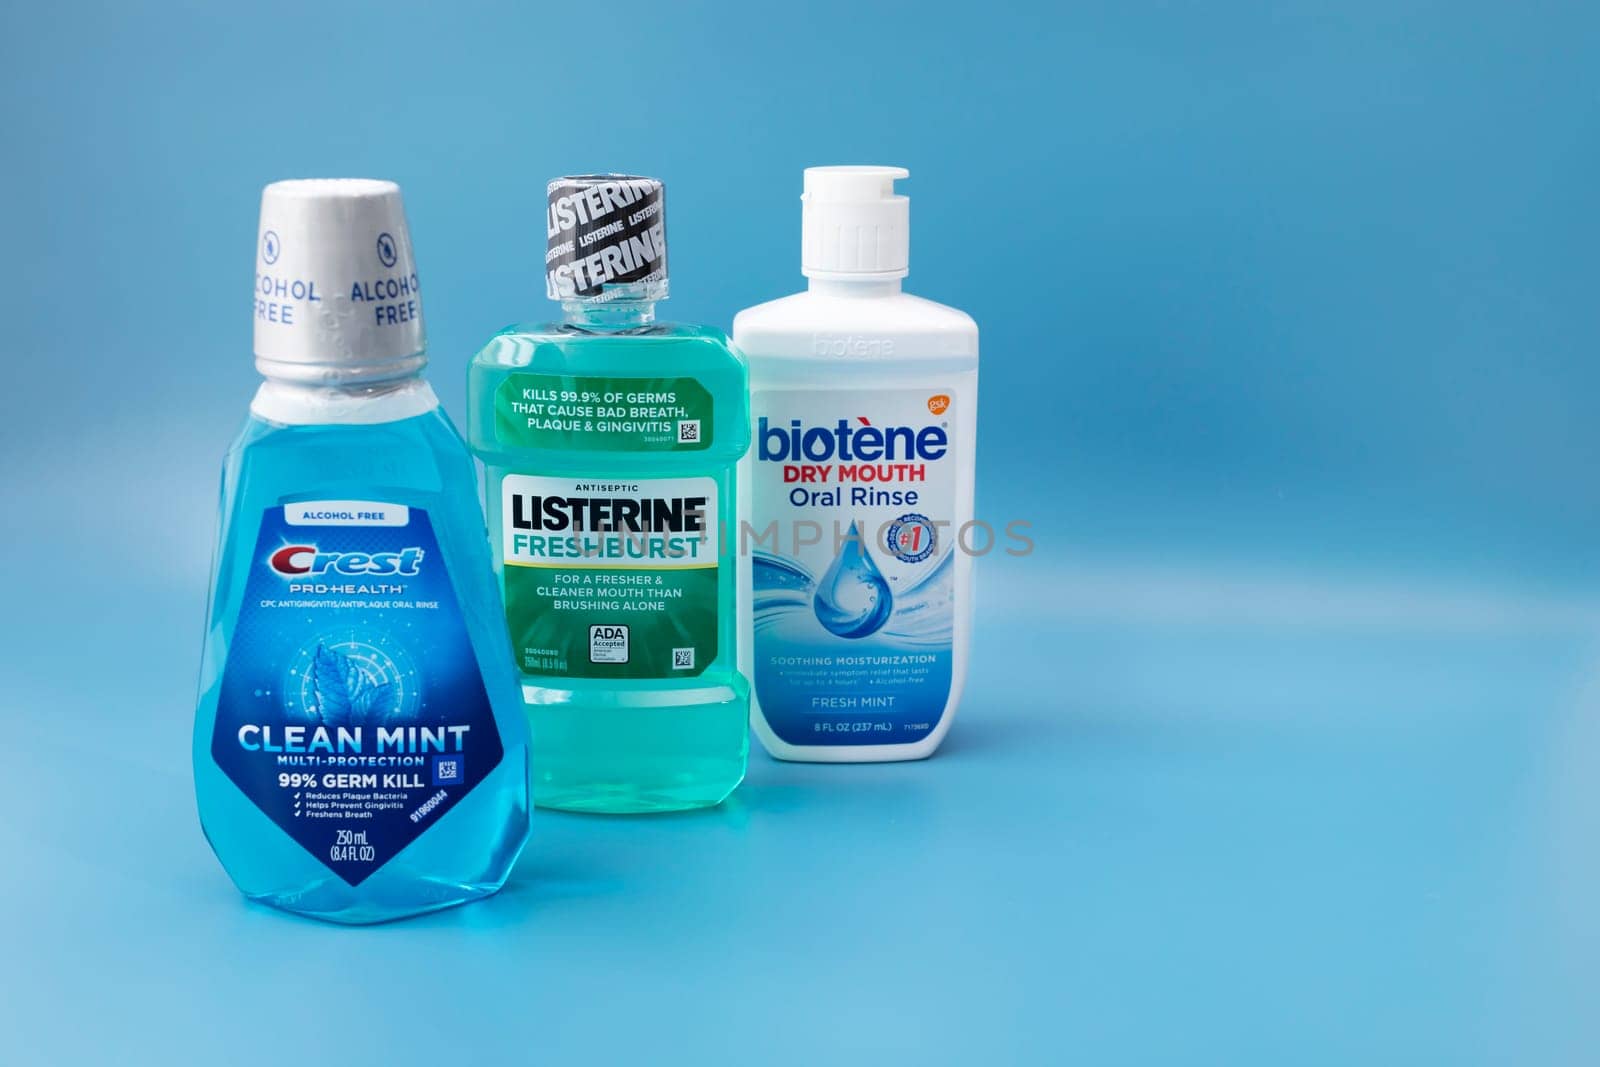 Few Mouth rinse or Mouthwash Bottles 'Crest', 'Listerine', 'Biotene' on Blue Background. Space For Text. Liquid for Rinsing Mouth. Oralcare Product. Horizontal Plane. Phoenix,USA: 09.24.2023 by netatsi